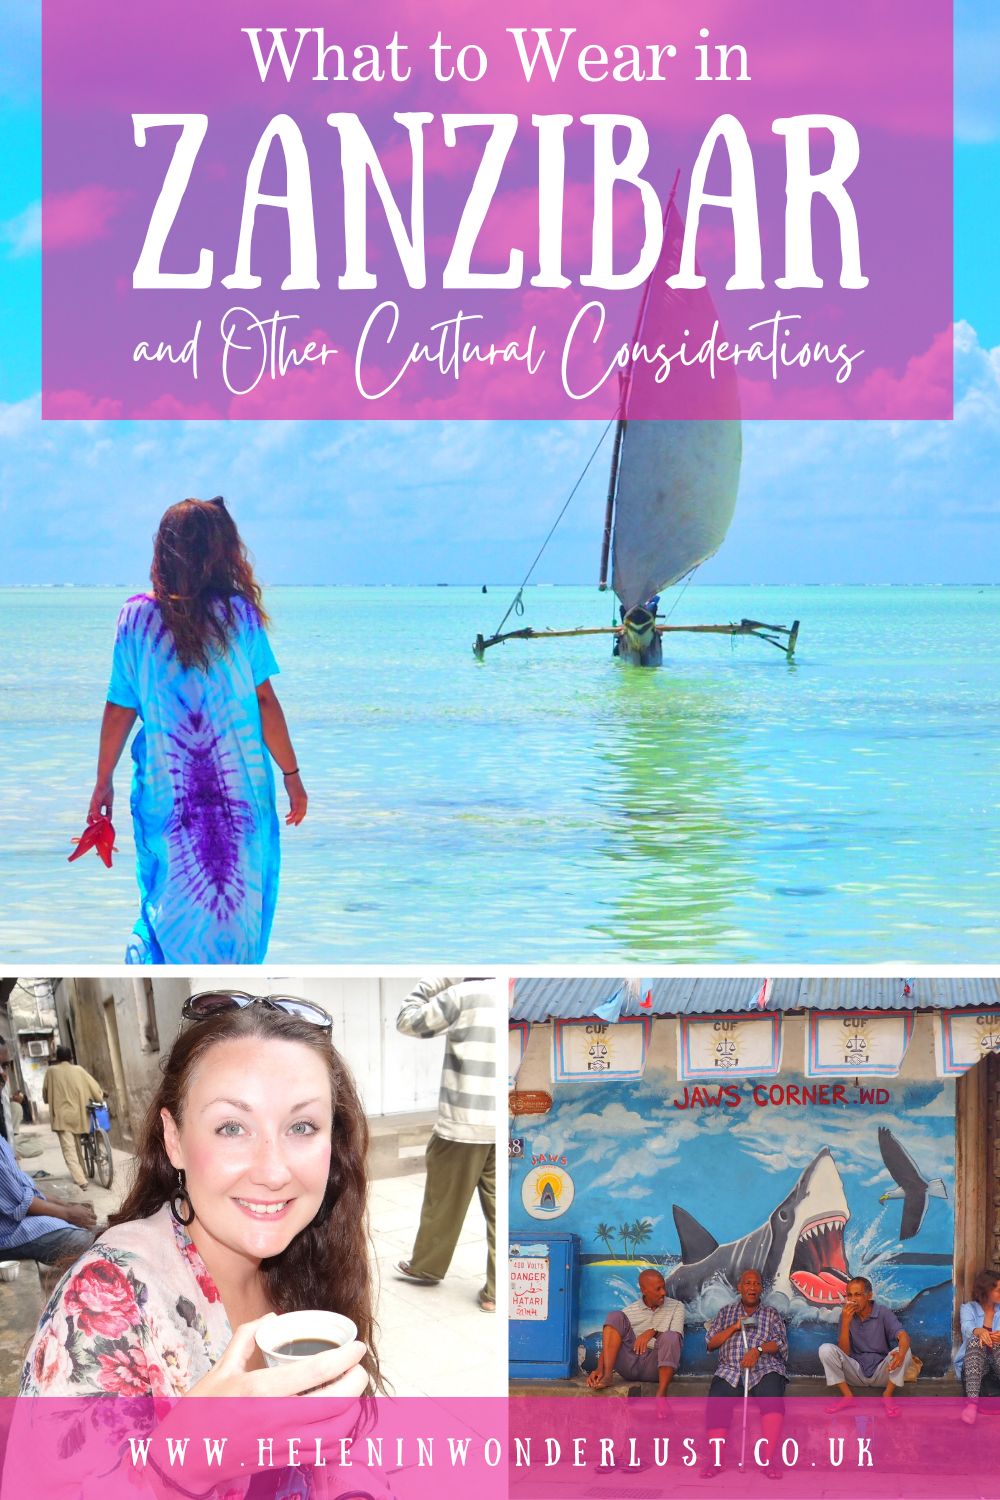 What to Wear in Zanzibar & Other Cultural Considerations